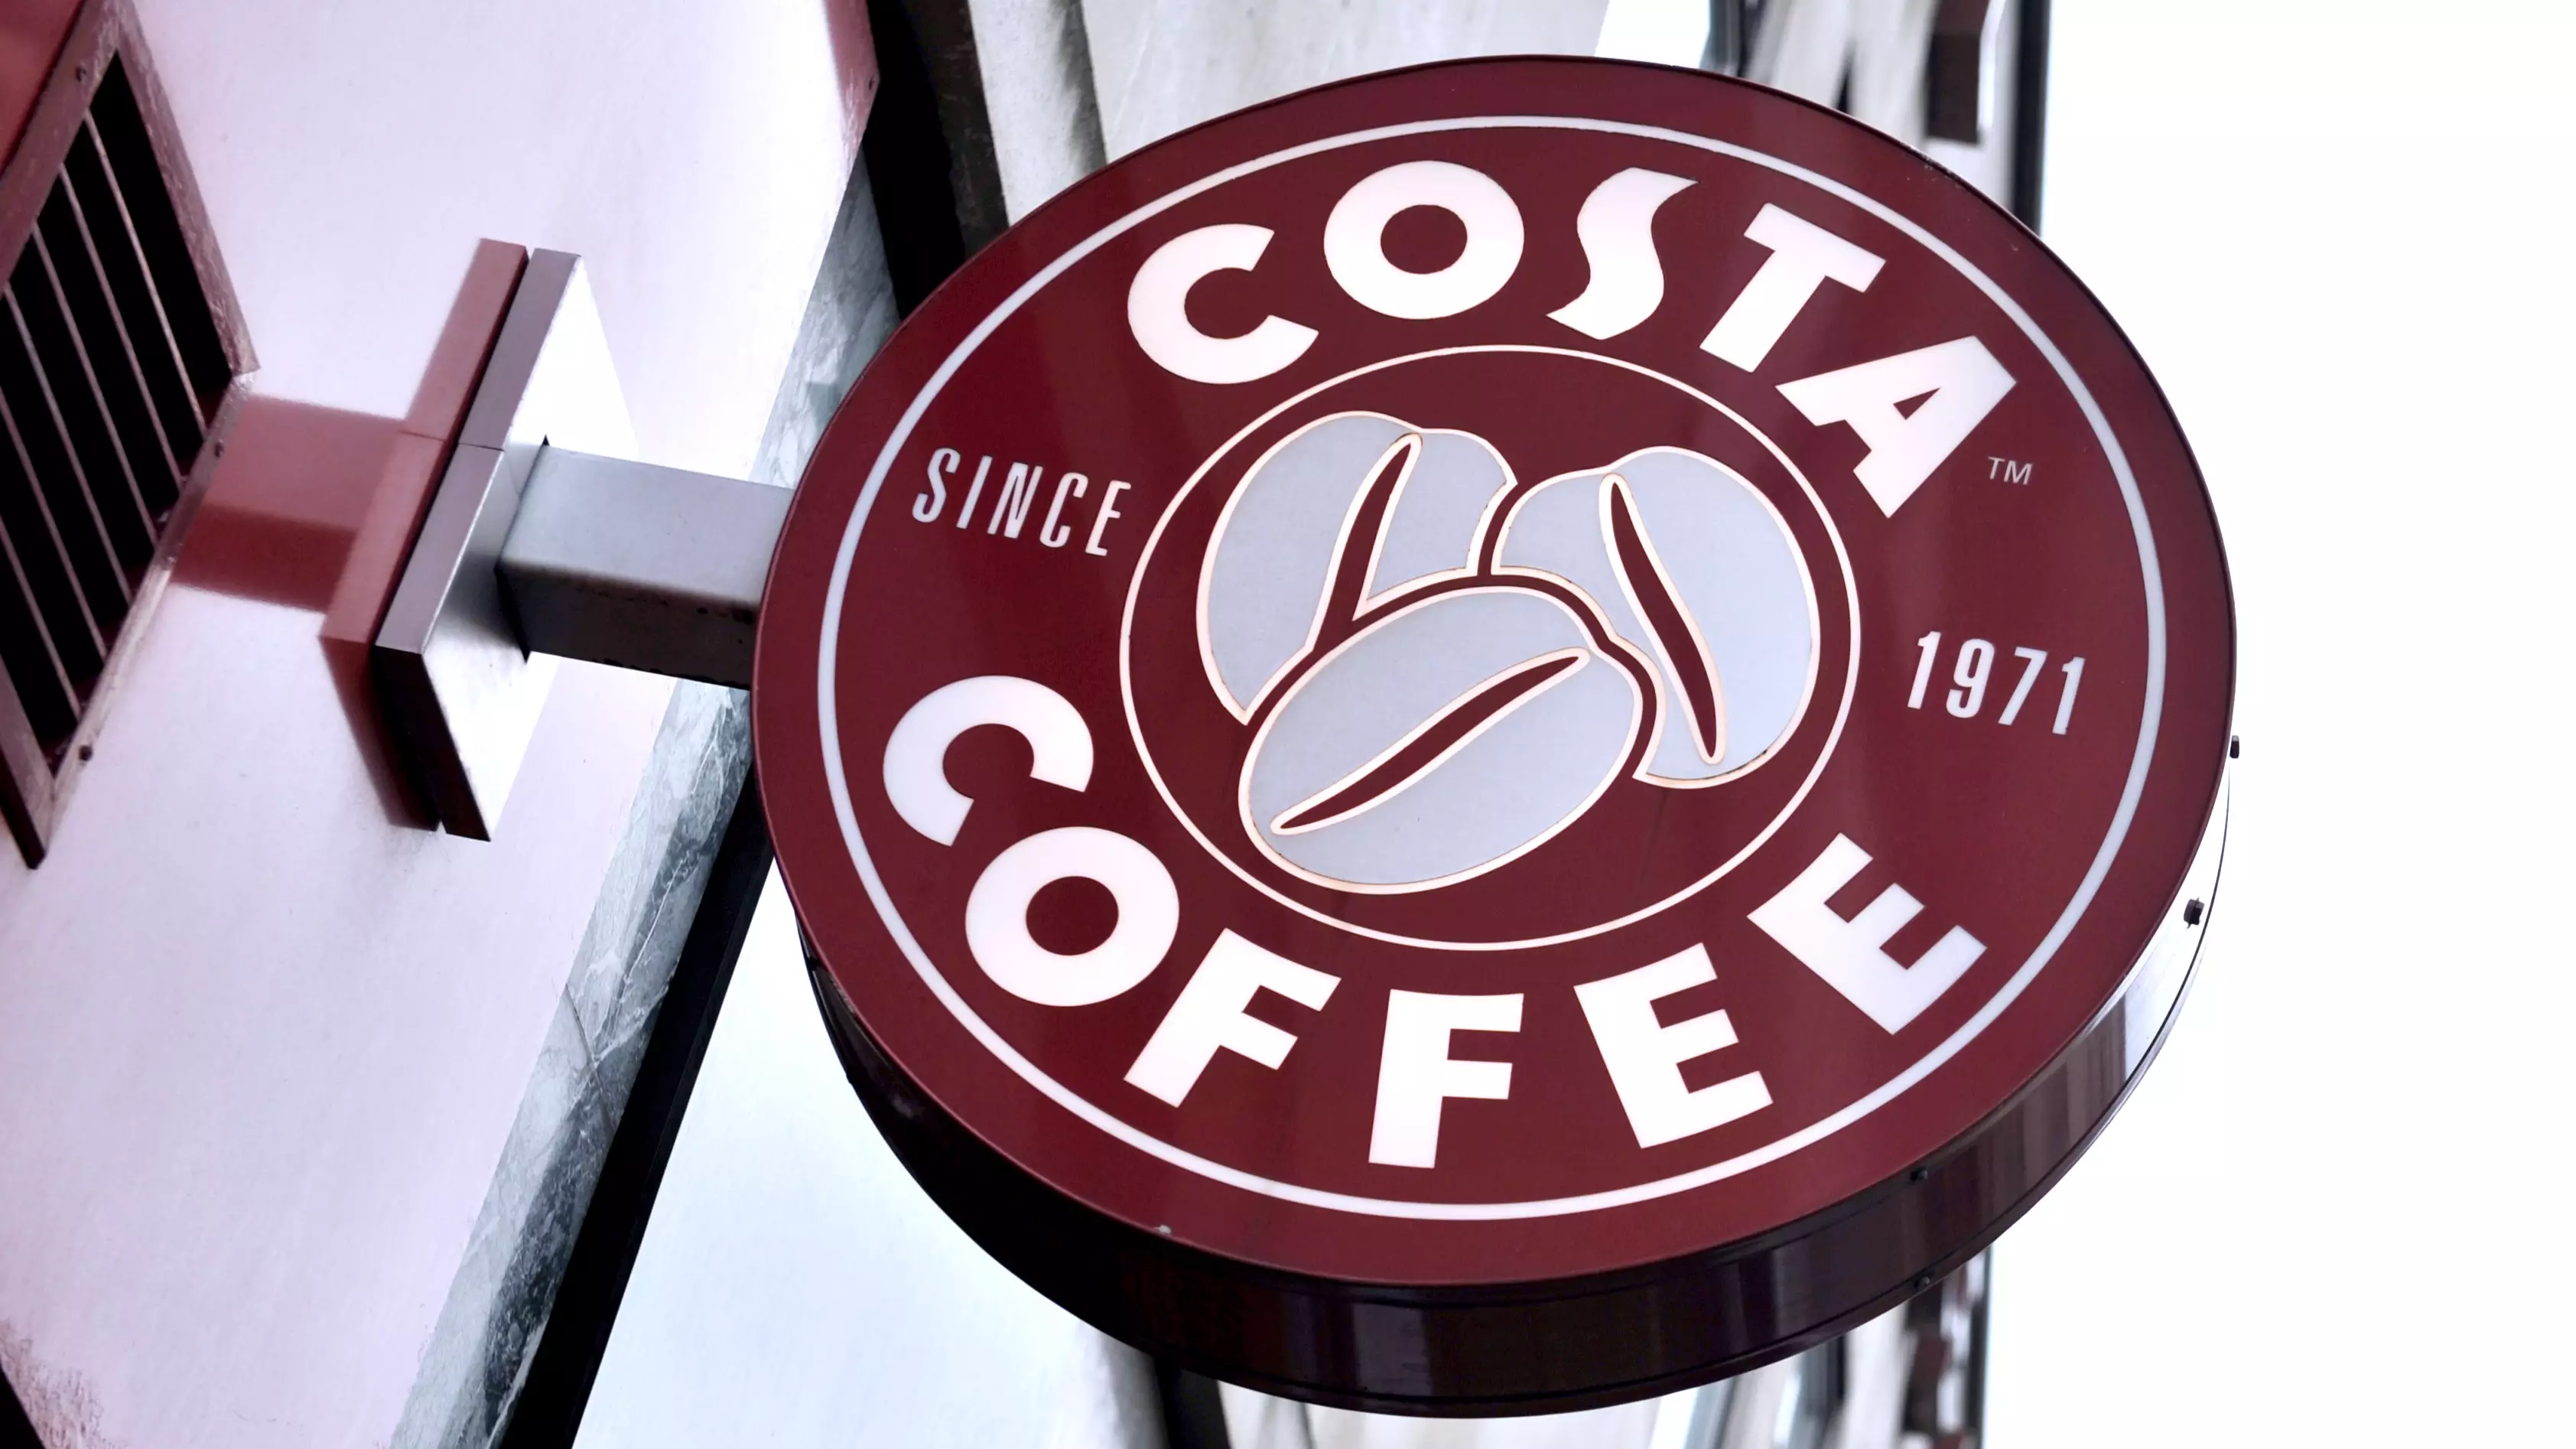 It's Time To Get Festive As Costa's Christmas Menu Is Back